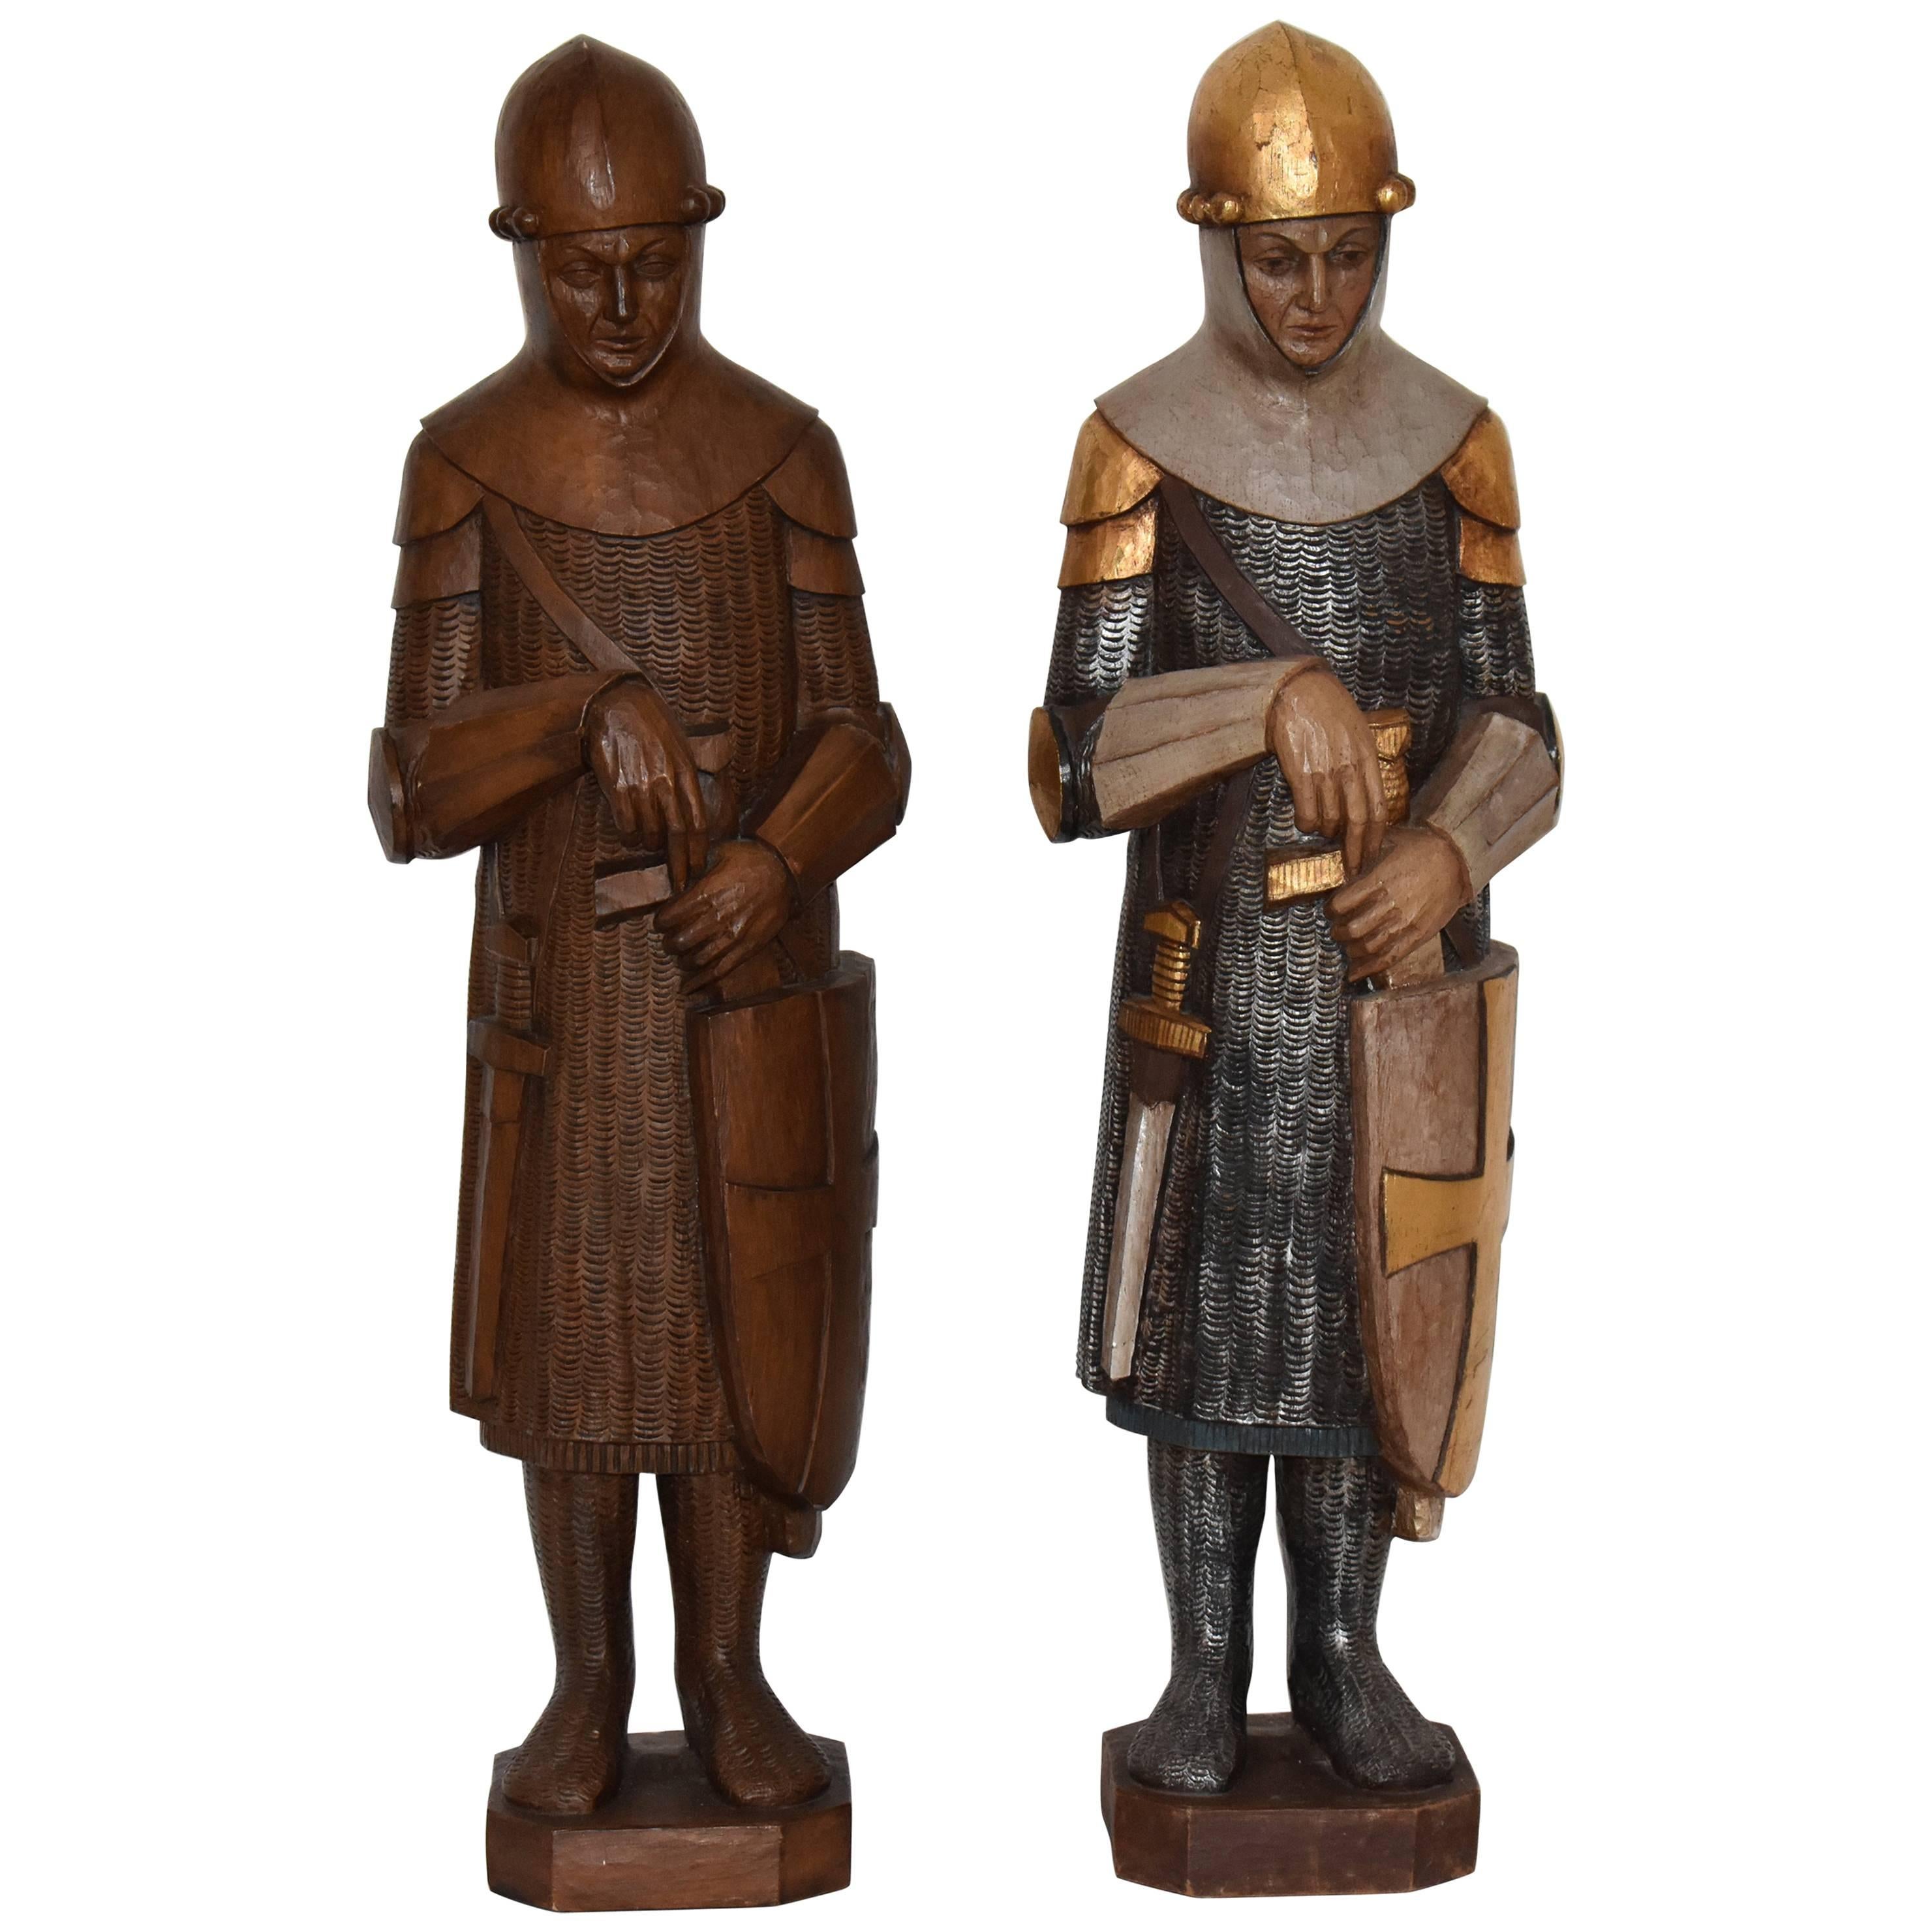 FINAL SALE Large Medieval Crusader Knight Sculptures, Carved Wood and Polychrome For Sale